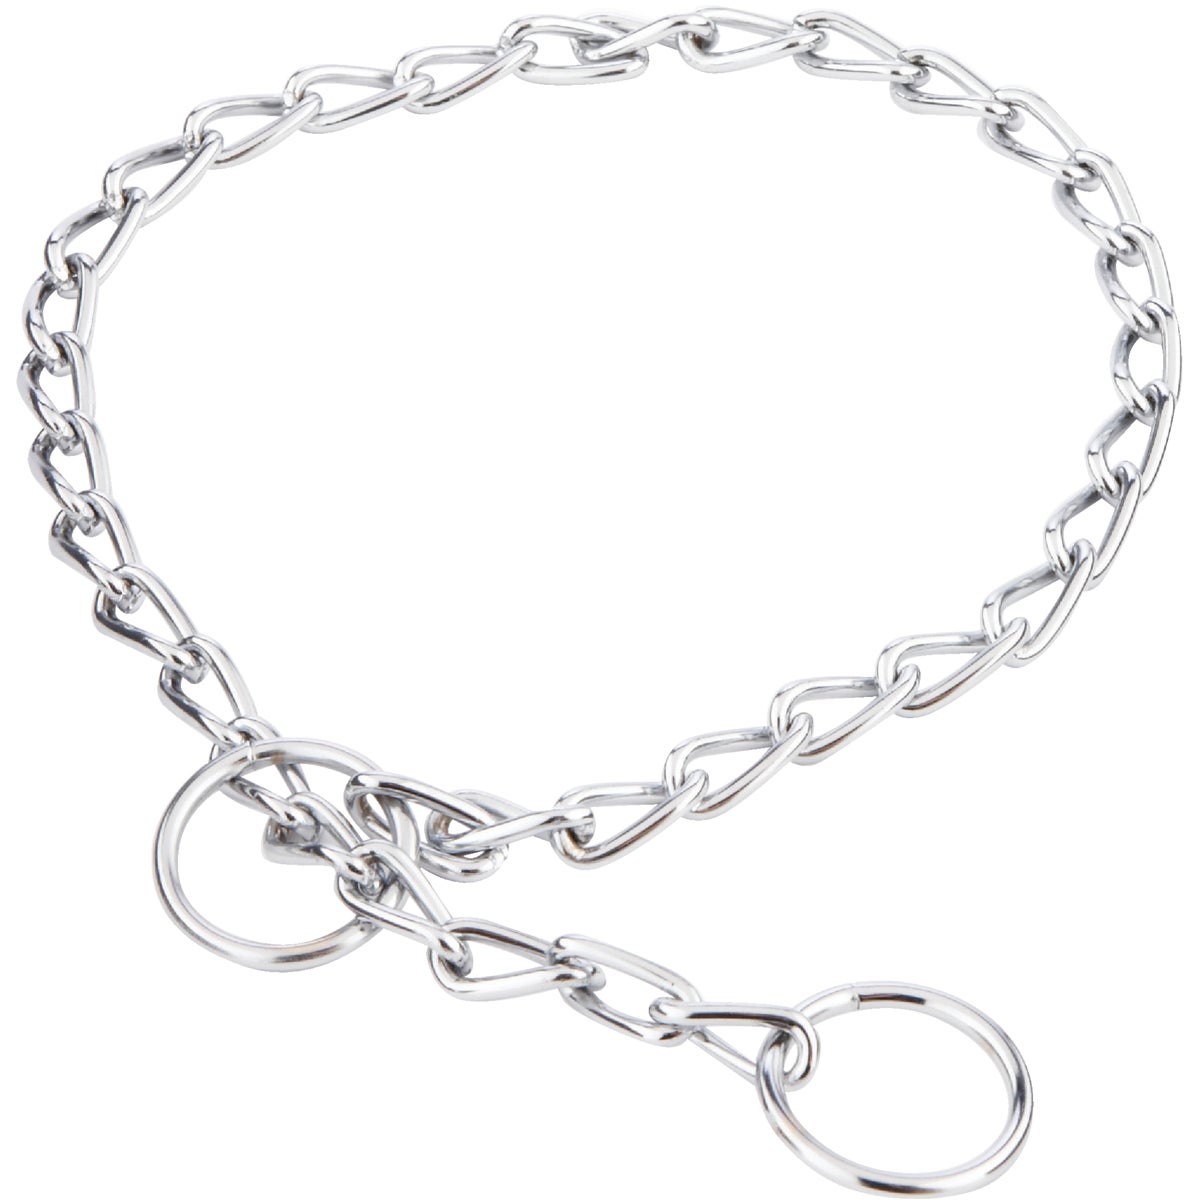 Item 807416, Ultra-strong, great-quality Chain Collars feature rugged electronically 